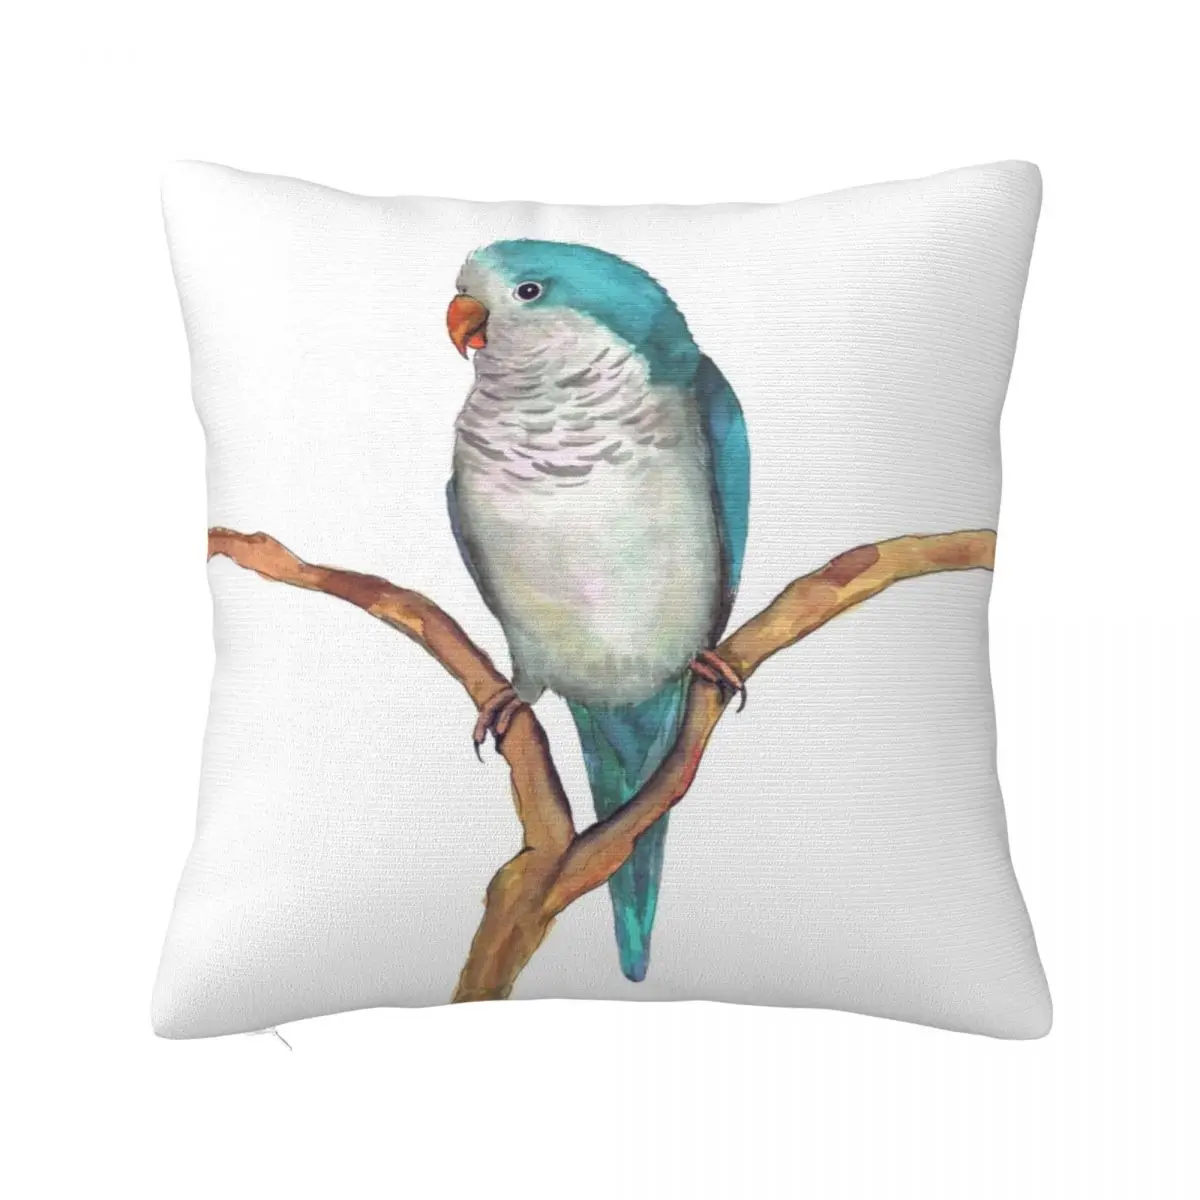 

A watercolor of a blue quaker parrot Throw Pillow luxury sofa pillows Cushions Cover